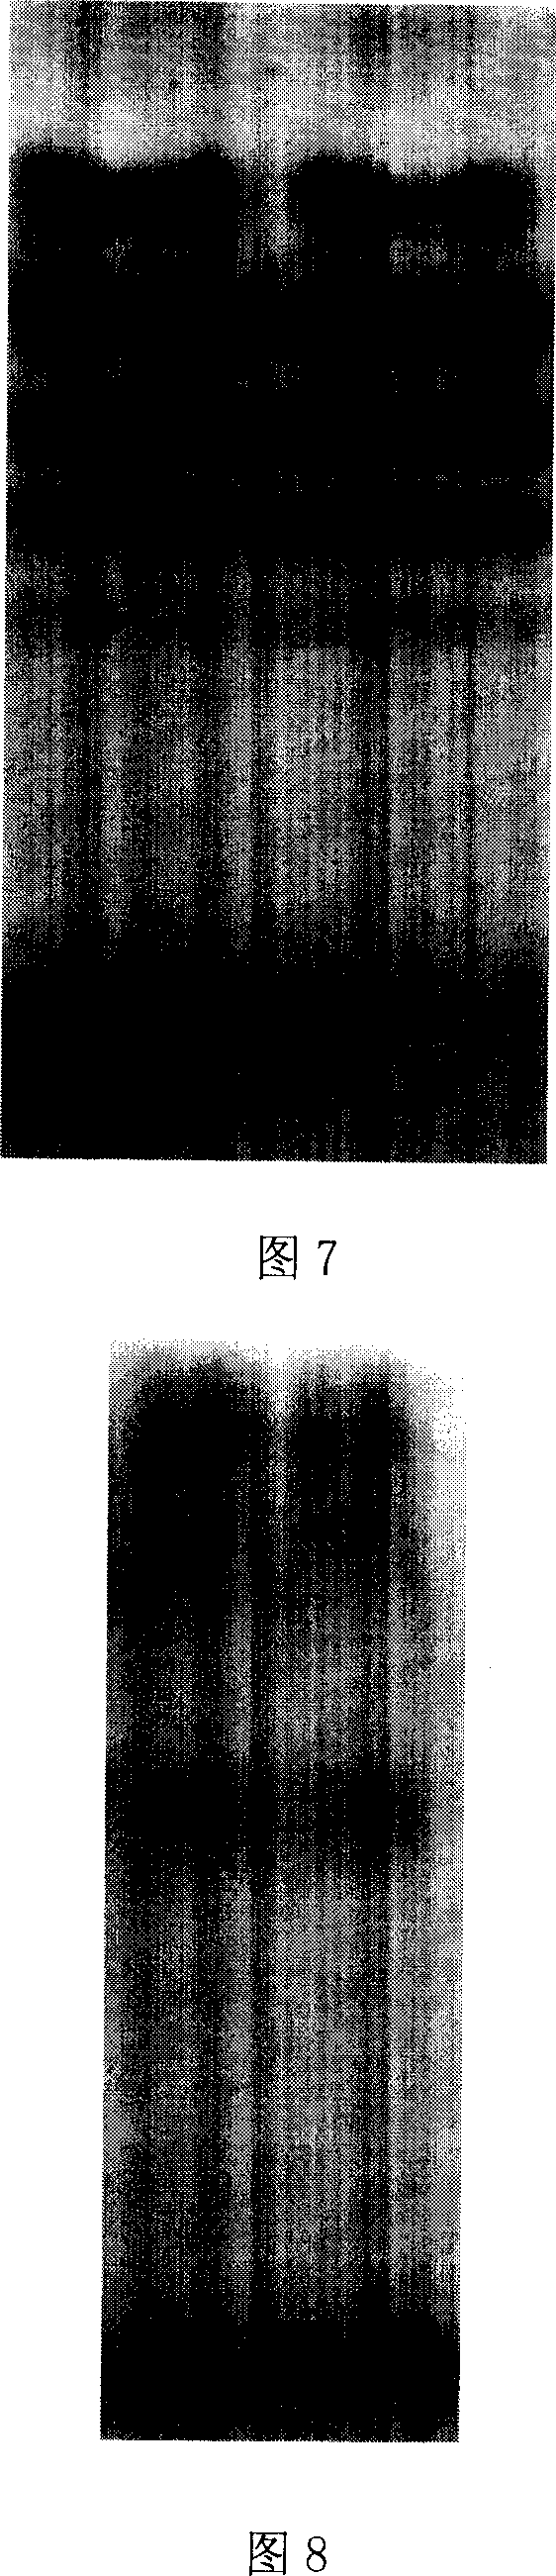 Tianzhushan white yak ear-edge tissue fiber cell system and constituting method